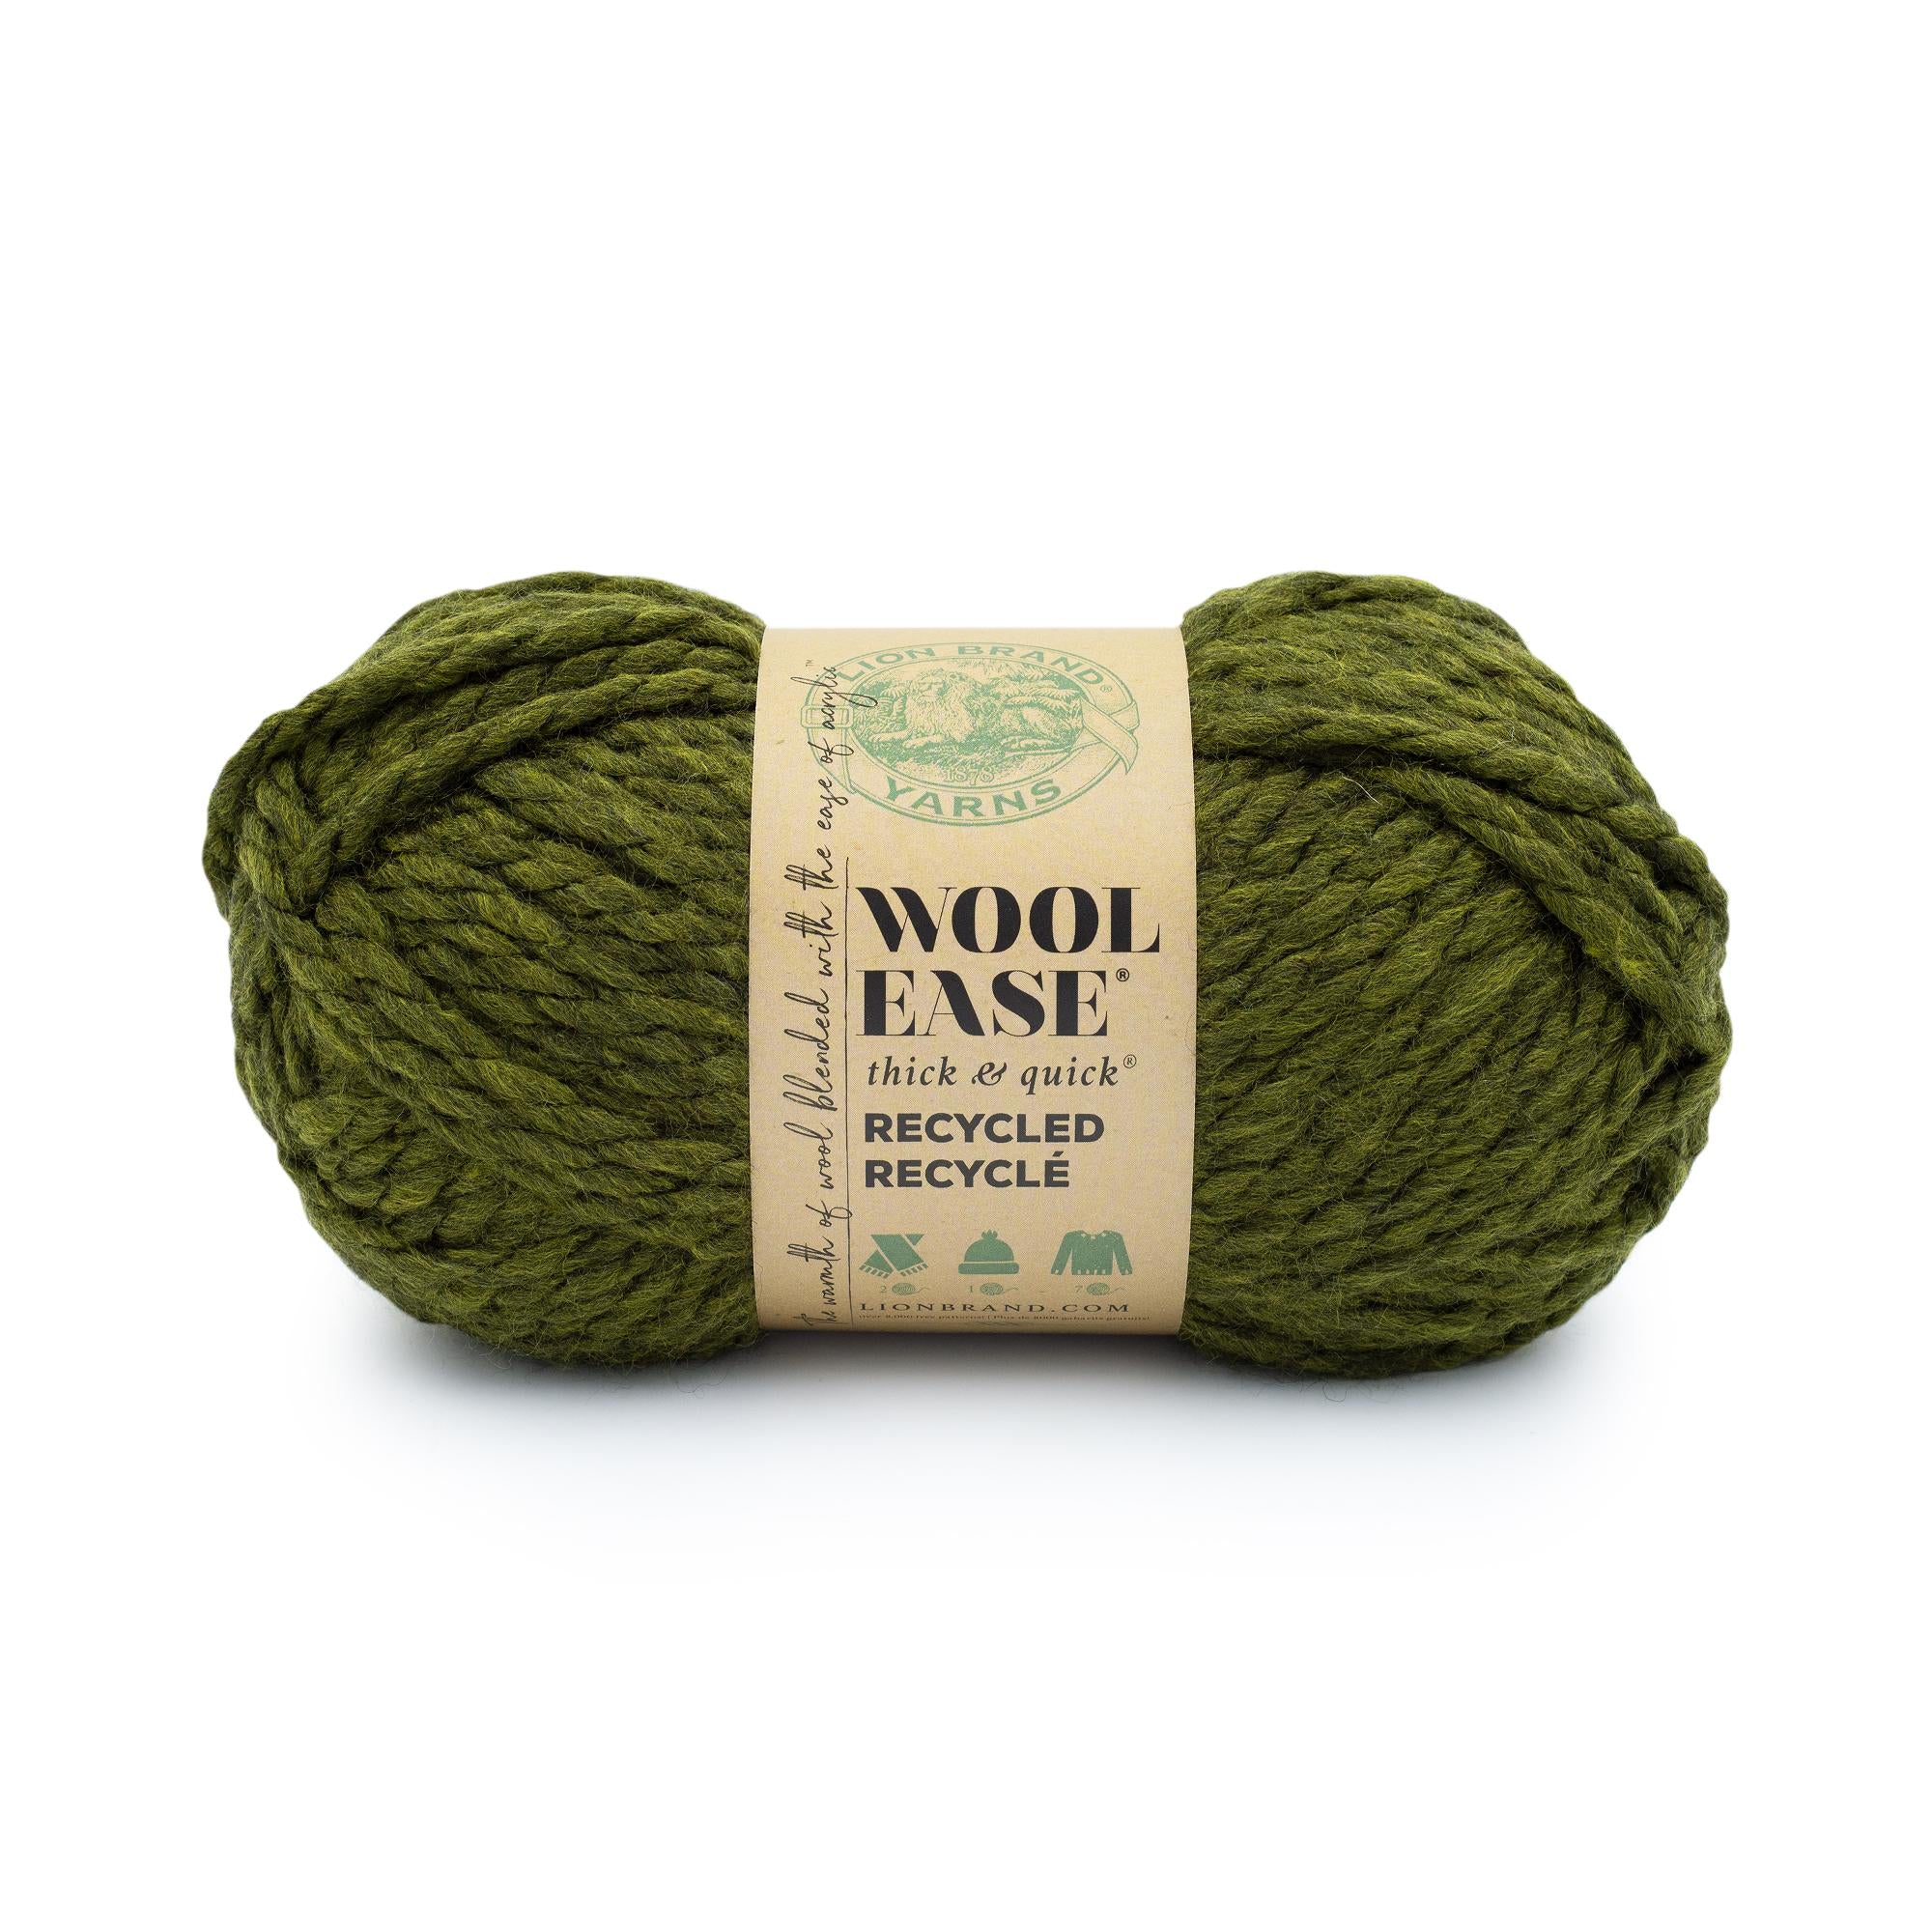 Lion Brand Wool-Ease Thick & Quick Yarn-Bluegrass, 1 count - City Market